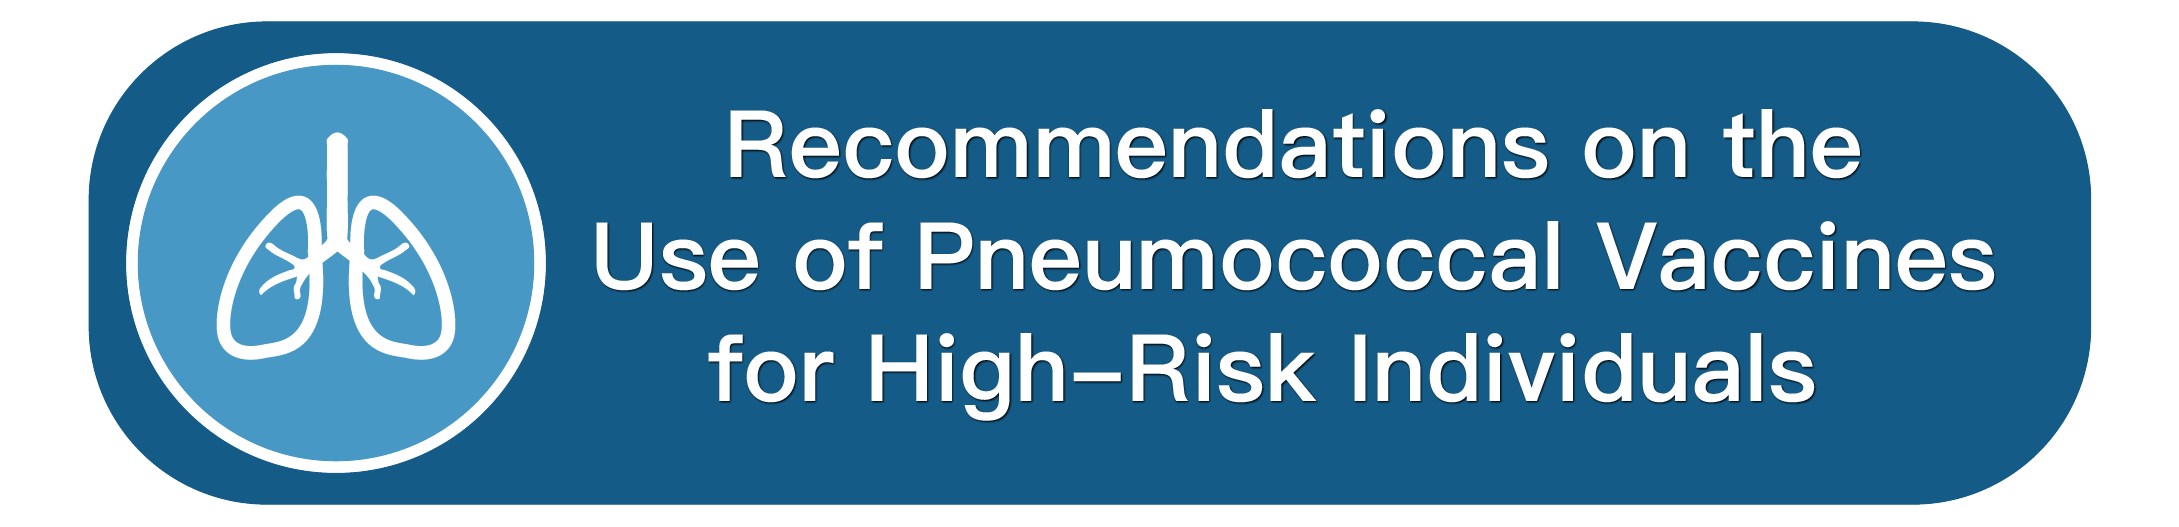 Recommendations on the Use of Pneumococcal Vaccines for High-Risk Individuals